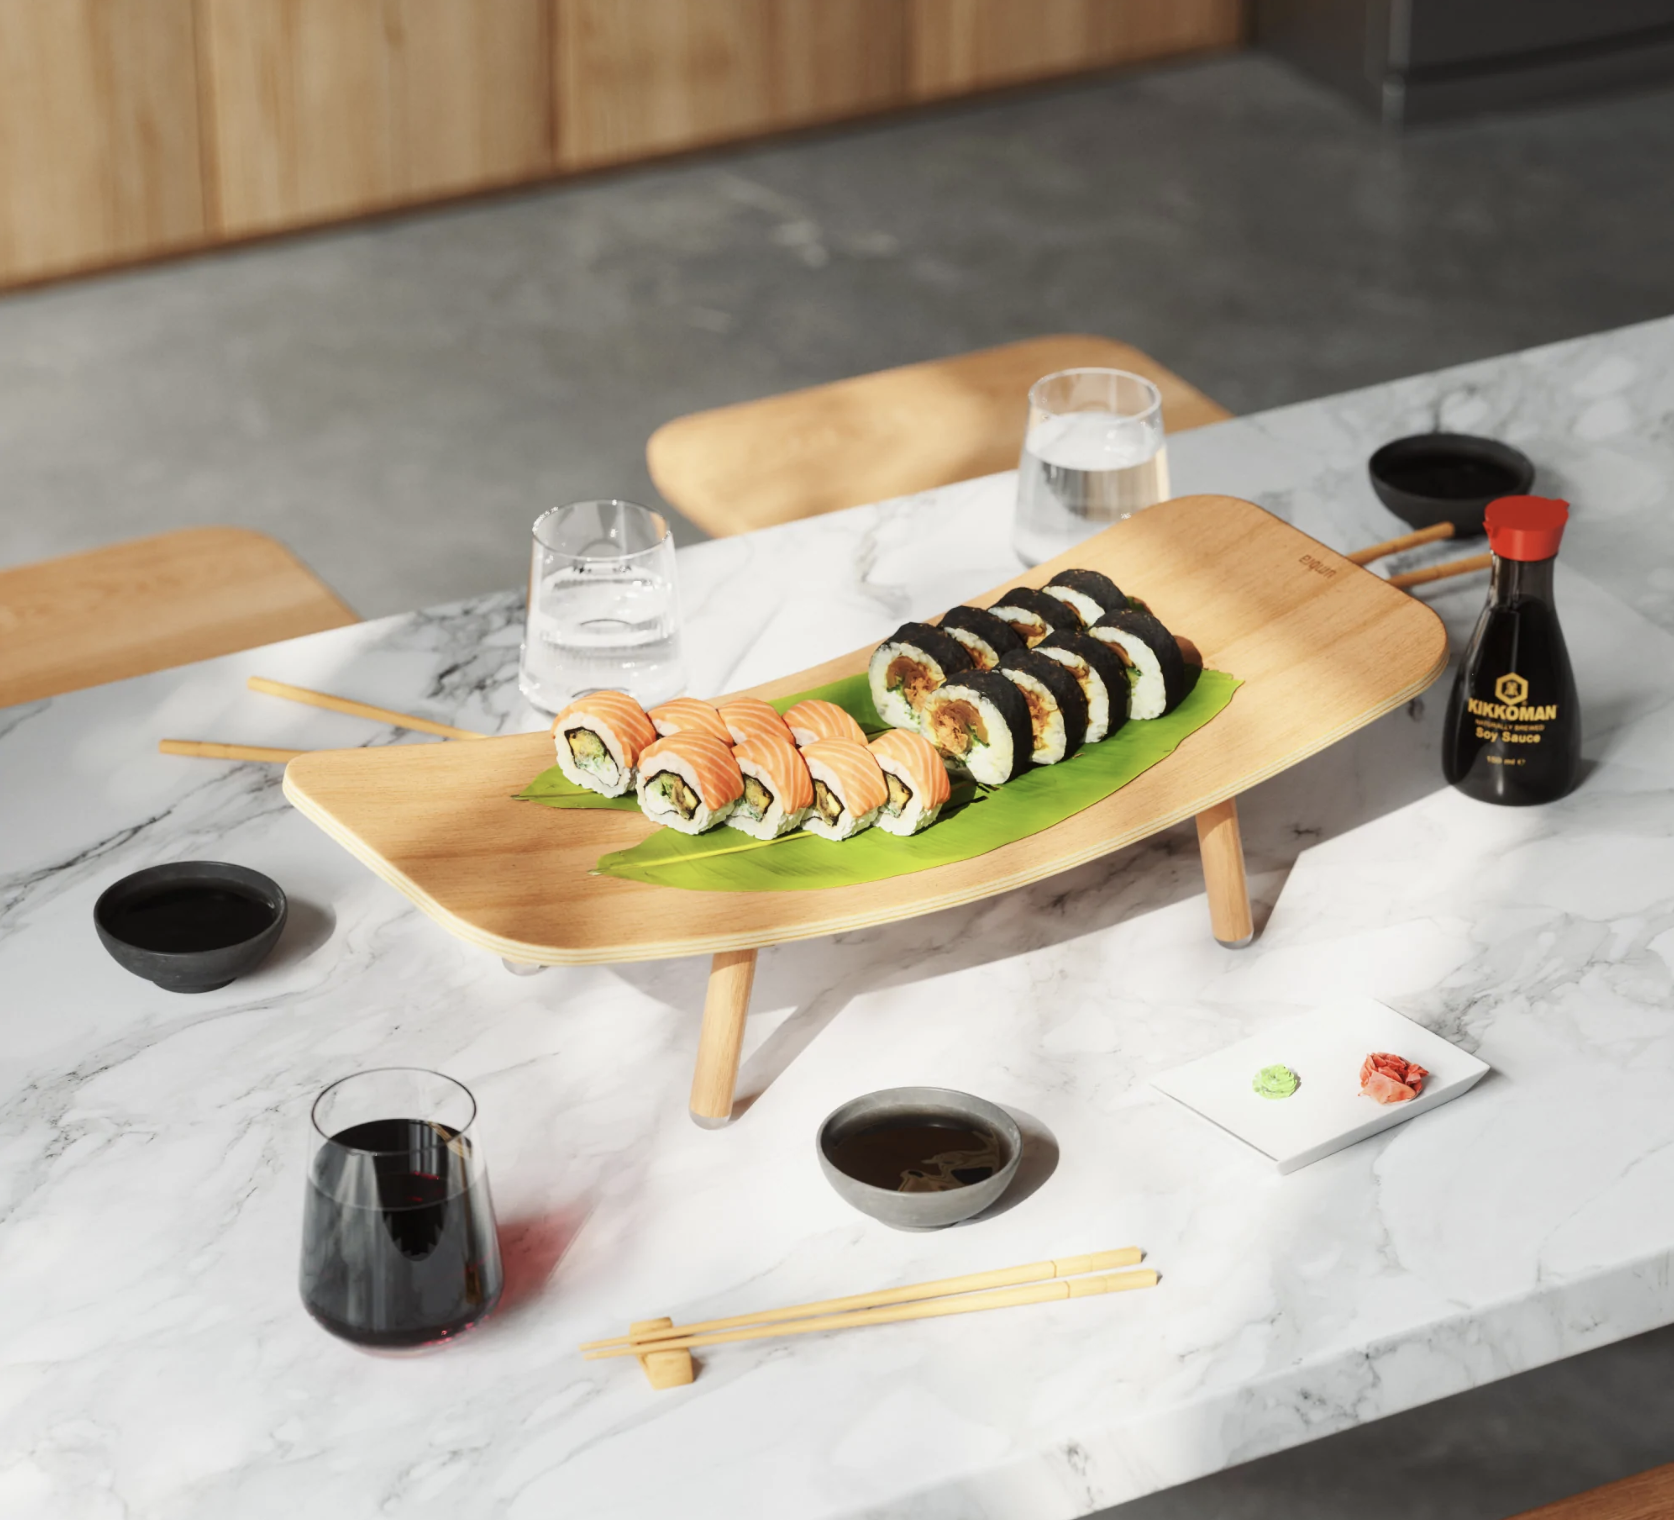 The tray with sushi on it